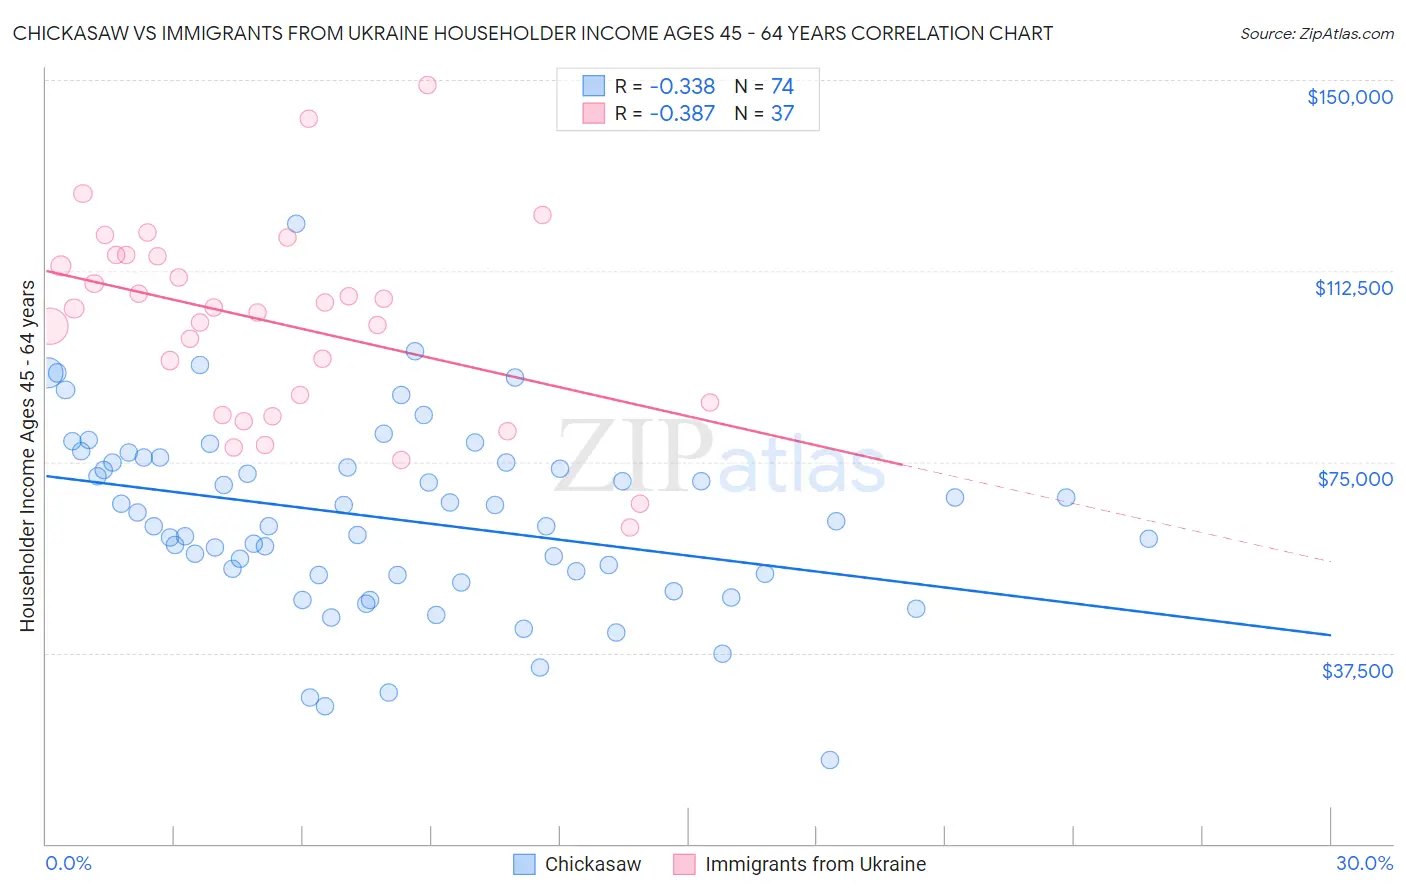 Chickasaw vs Immigrants from Ukraine Householder Income Ages 45 - 64 years